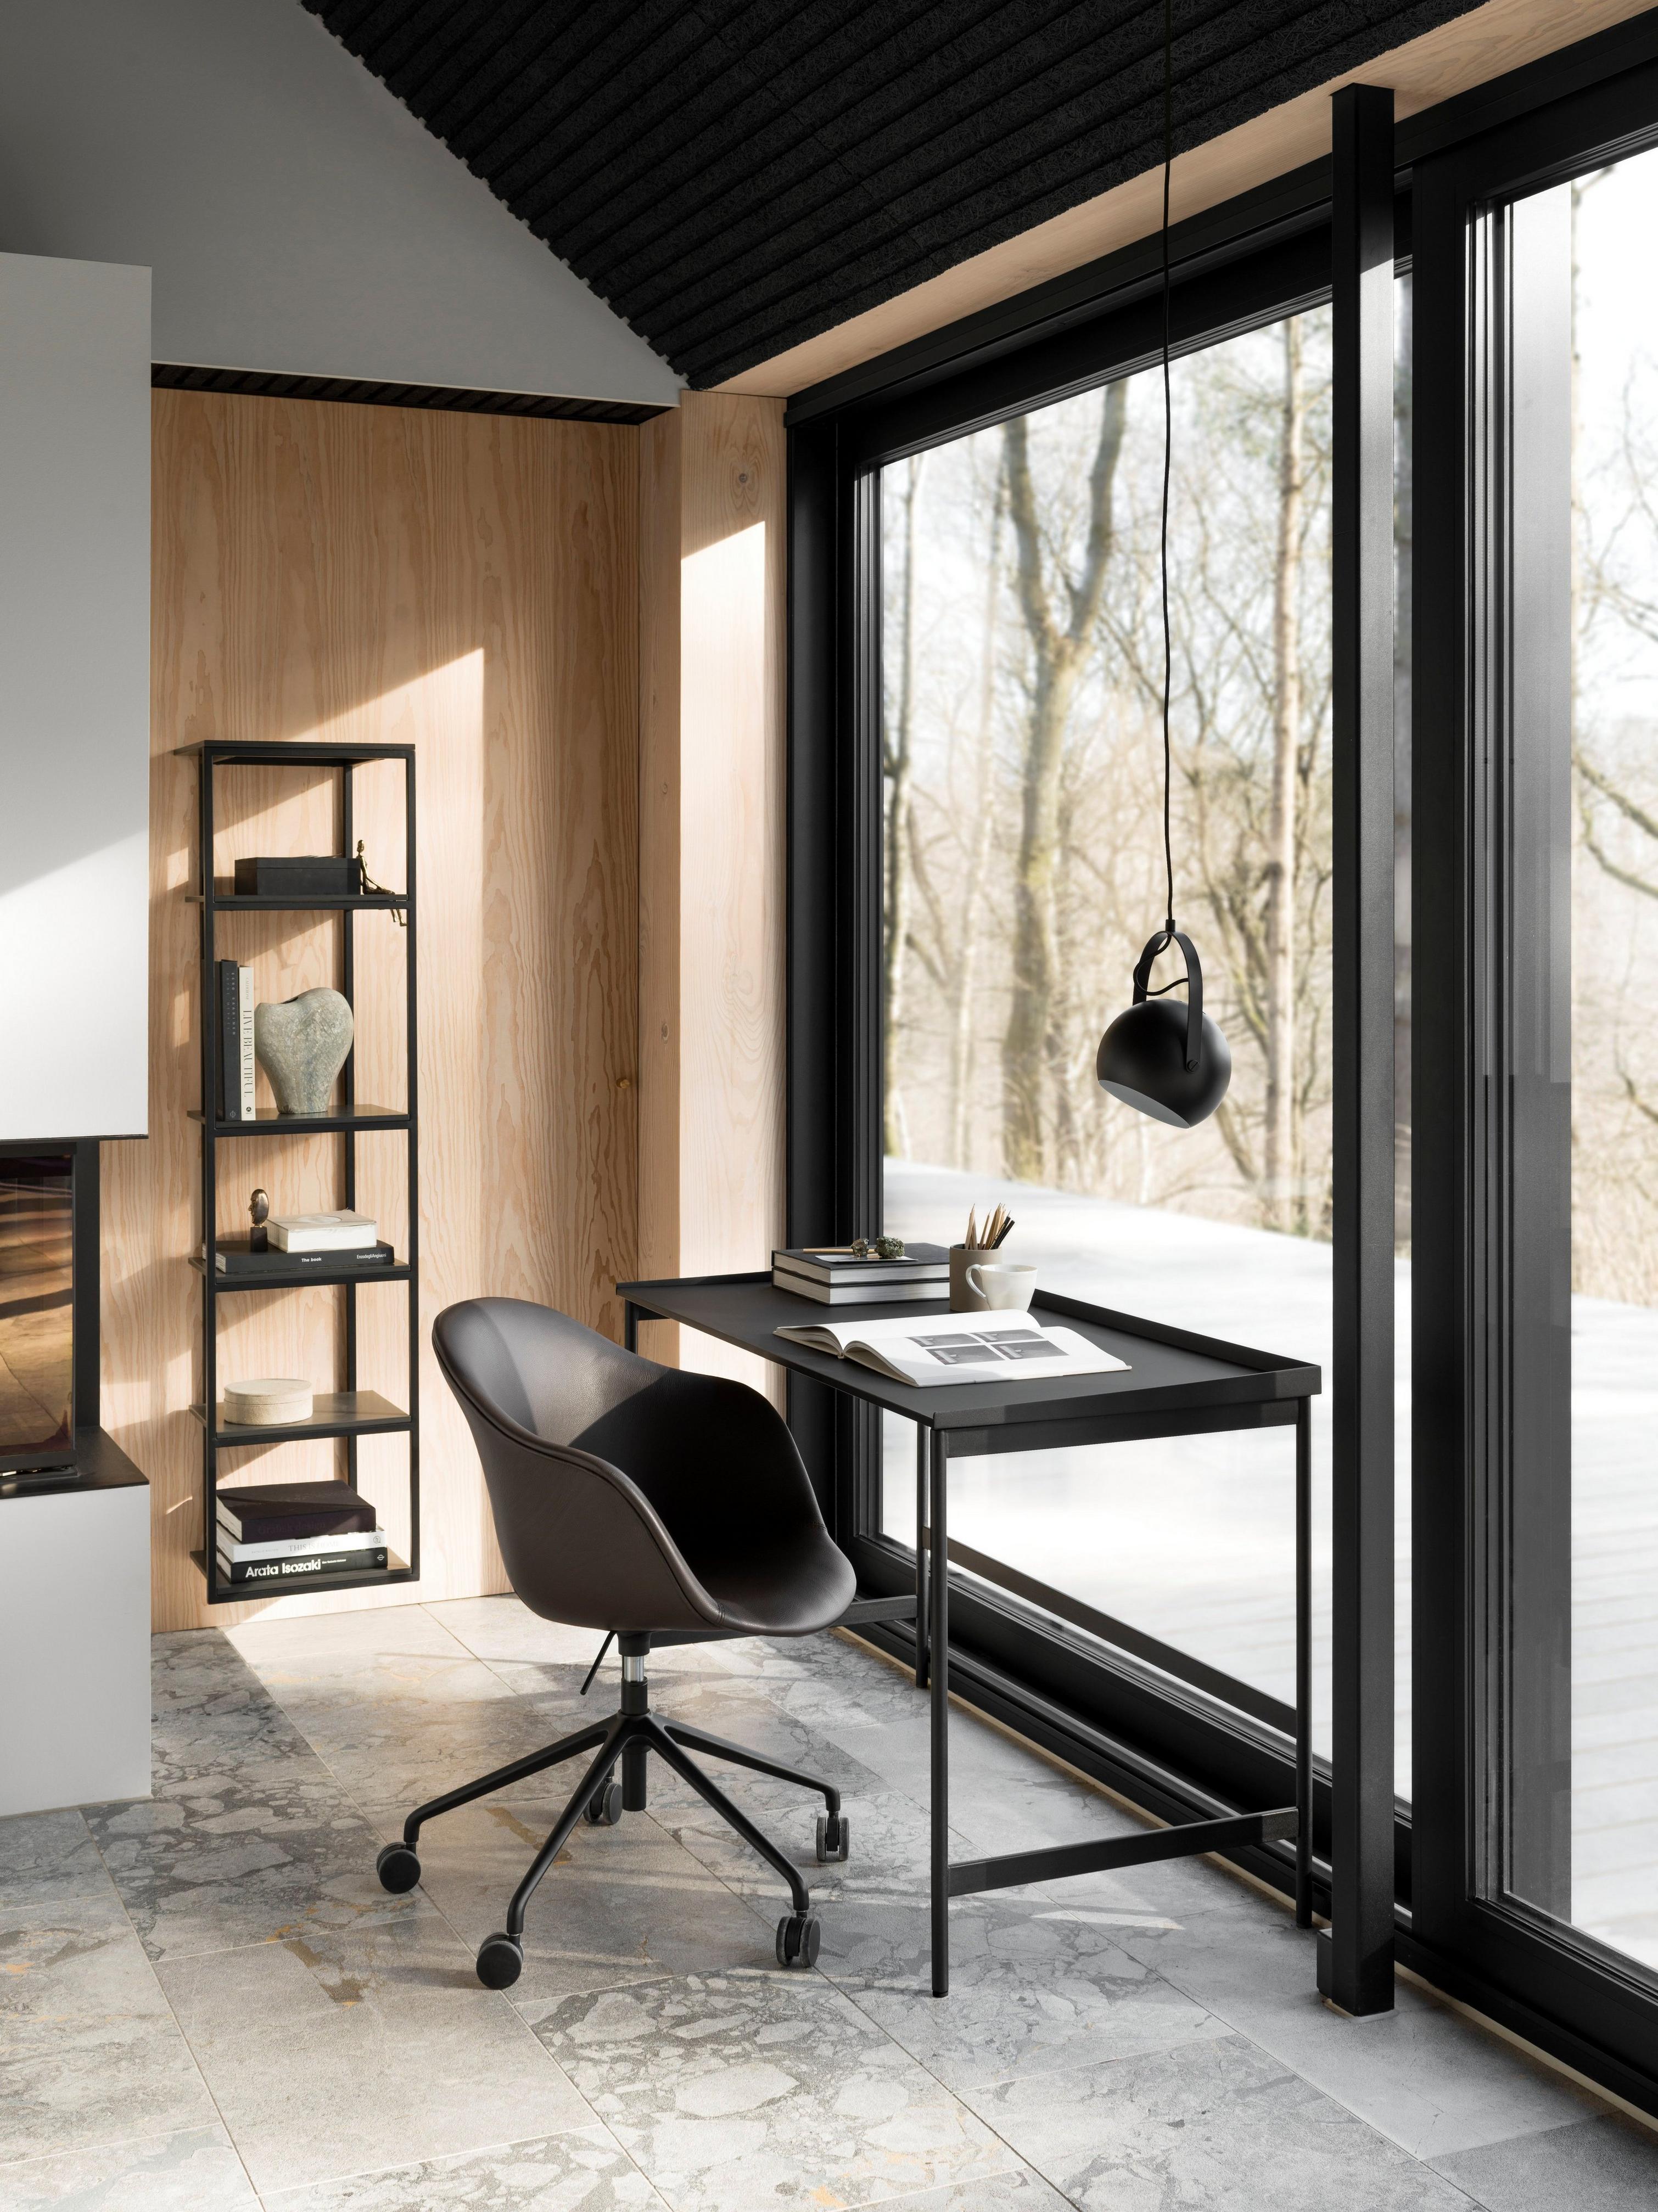 Modern office with black chair, desk, pendant light, and bookshelf by a large window with a forest view.